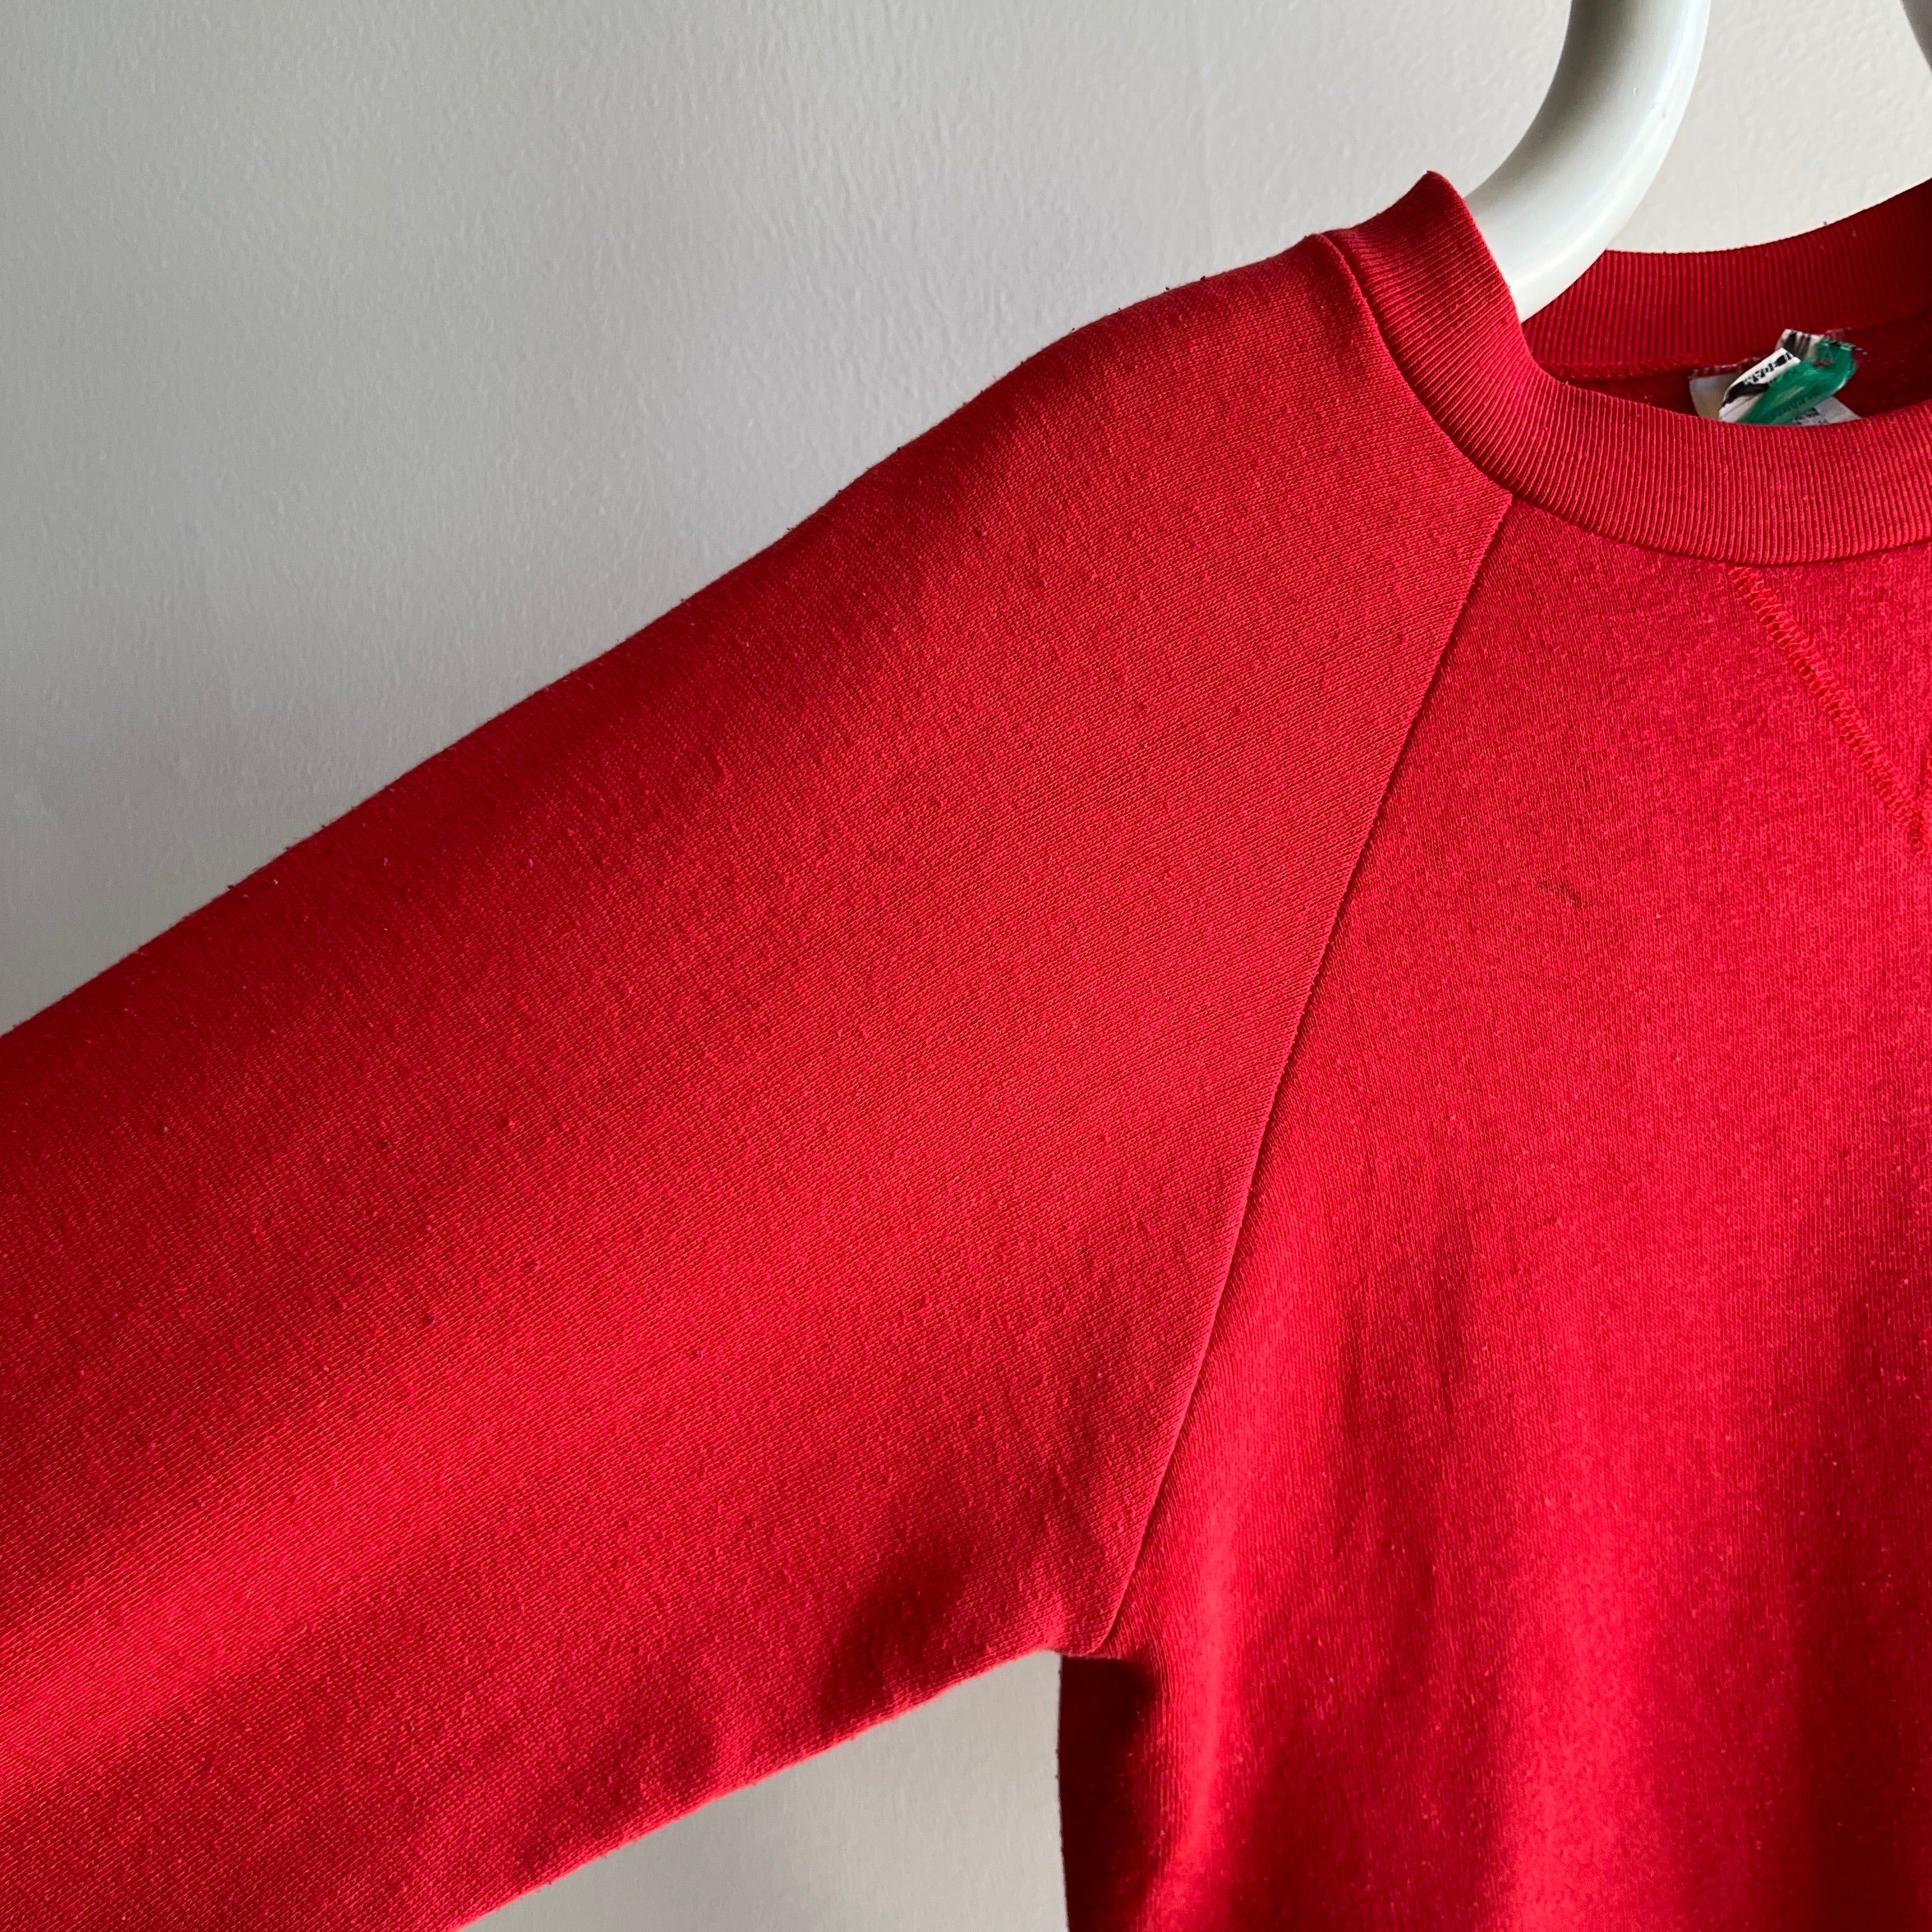 1970/80s McGregor Red Sweatshirt with a Single Gusset